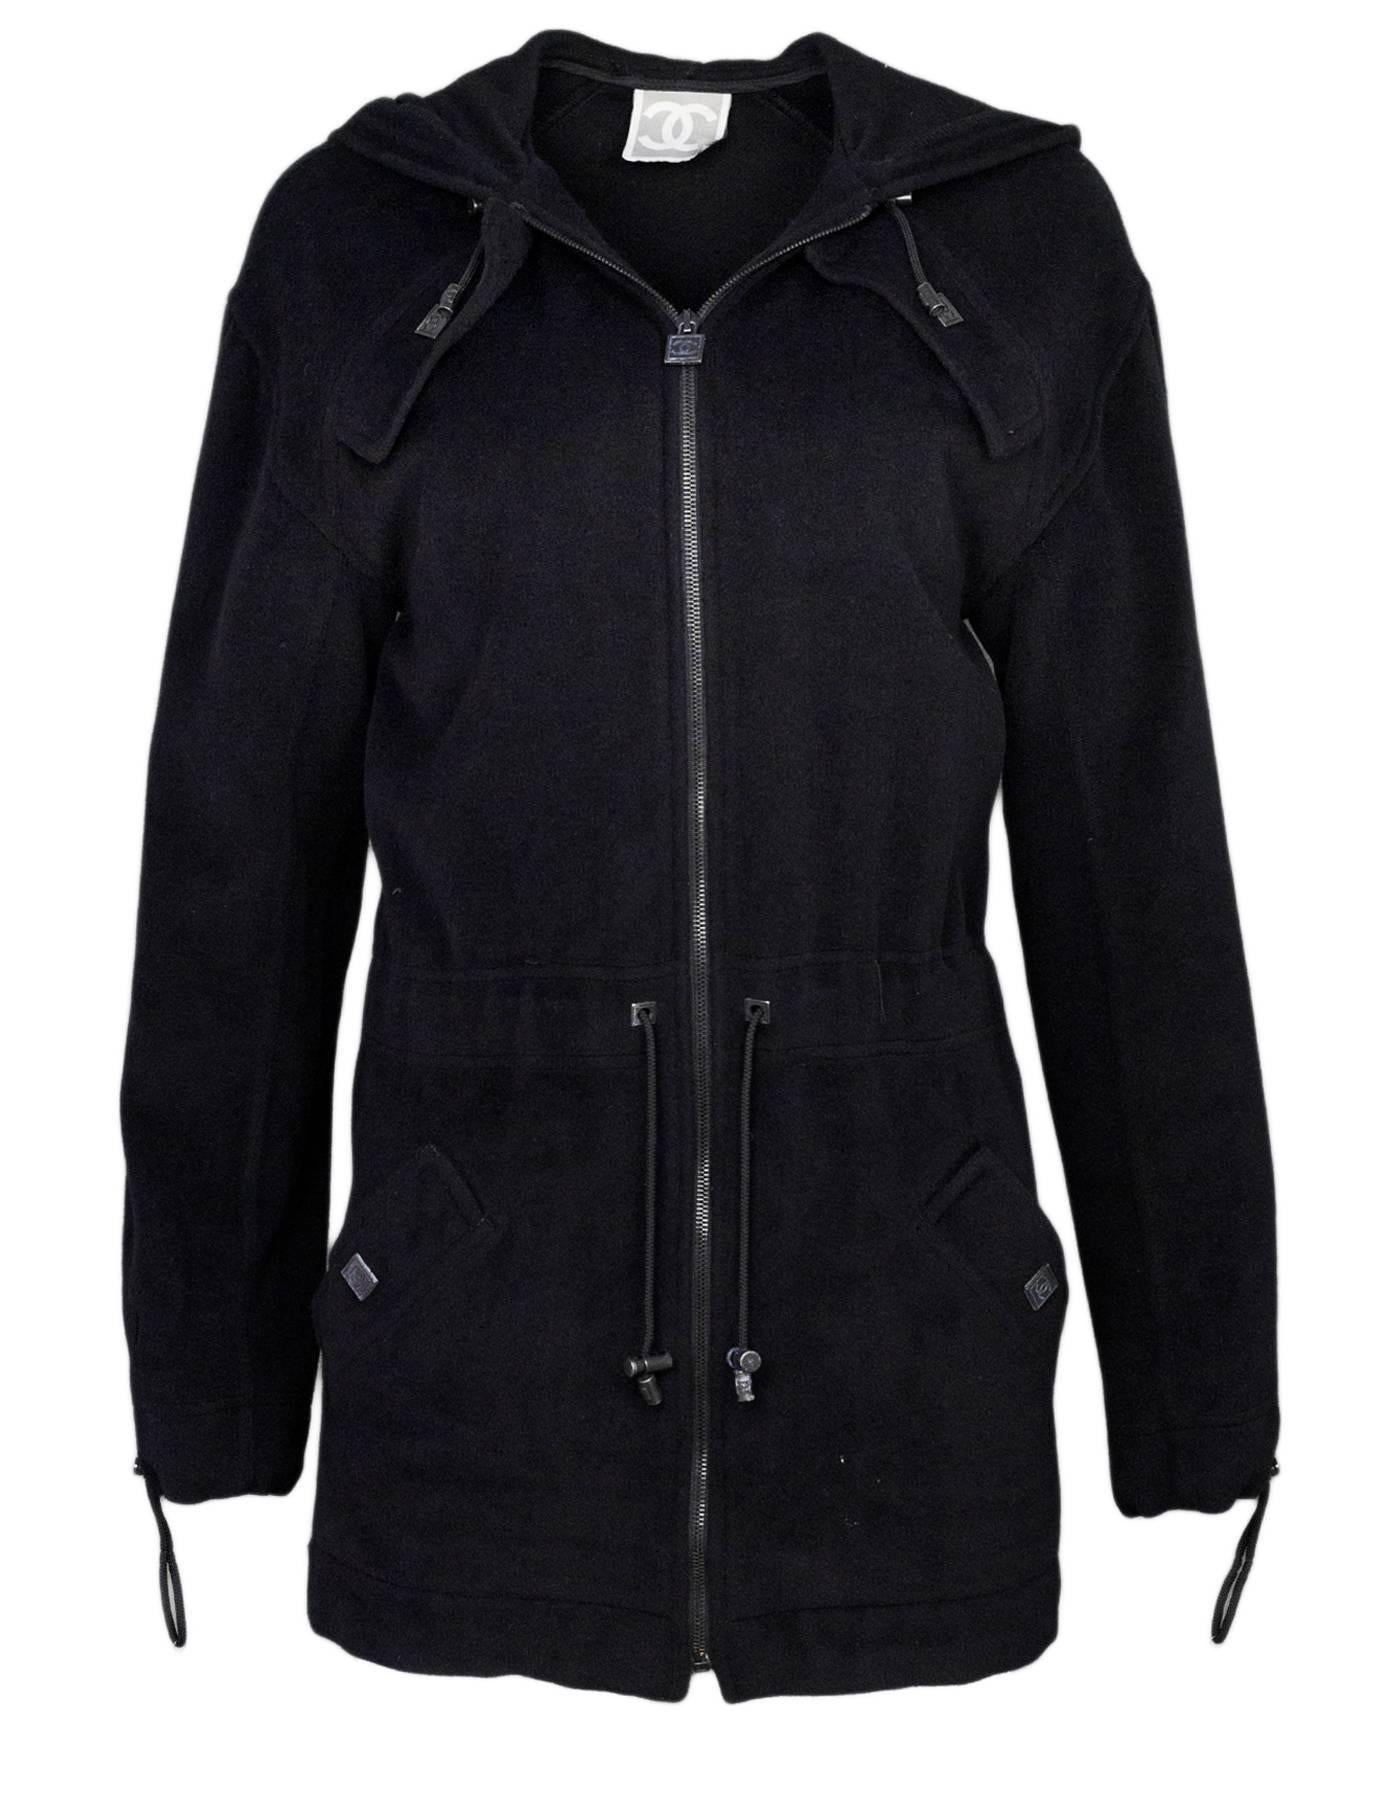 Chanel Sport Black Angora Hooded Jacket Sz FR38

Features drawstring waist 

Made In: France
Color: Black
Composition: 75% angora, 25% laine
Closure/Opening: Zip closure
Overall Condition: Excellent pre-owned condition
Marked Size: